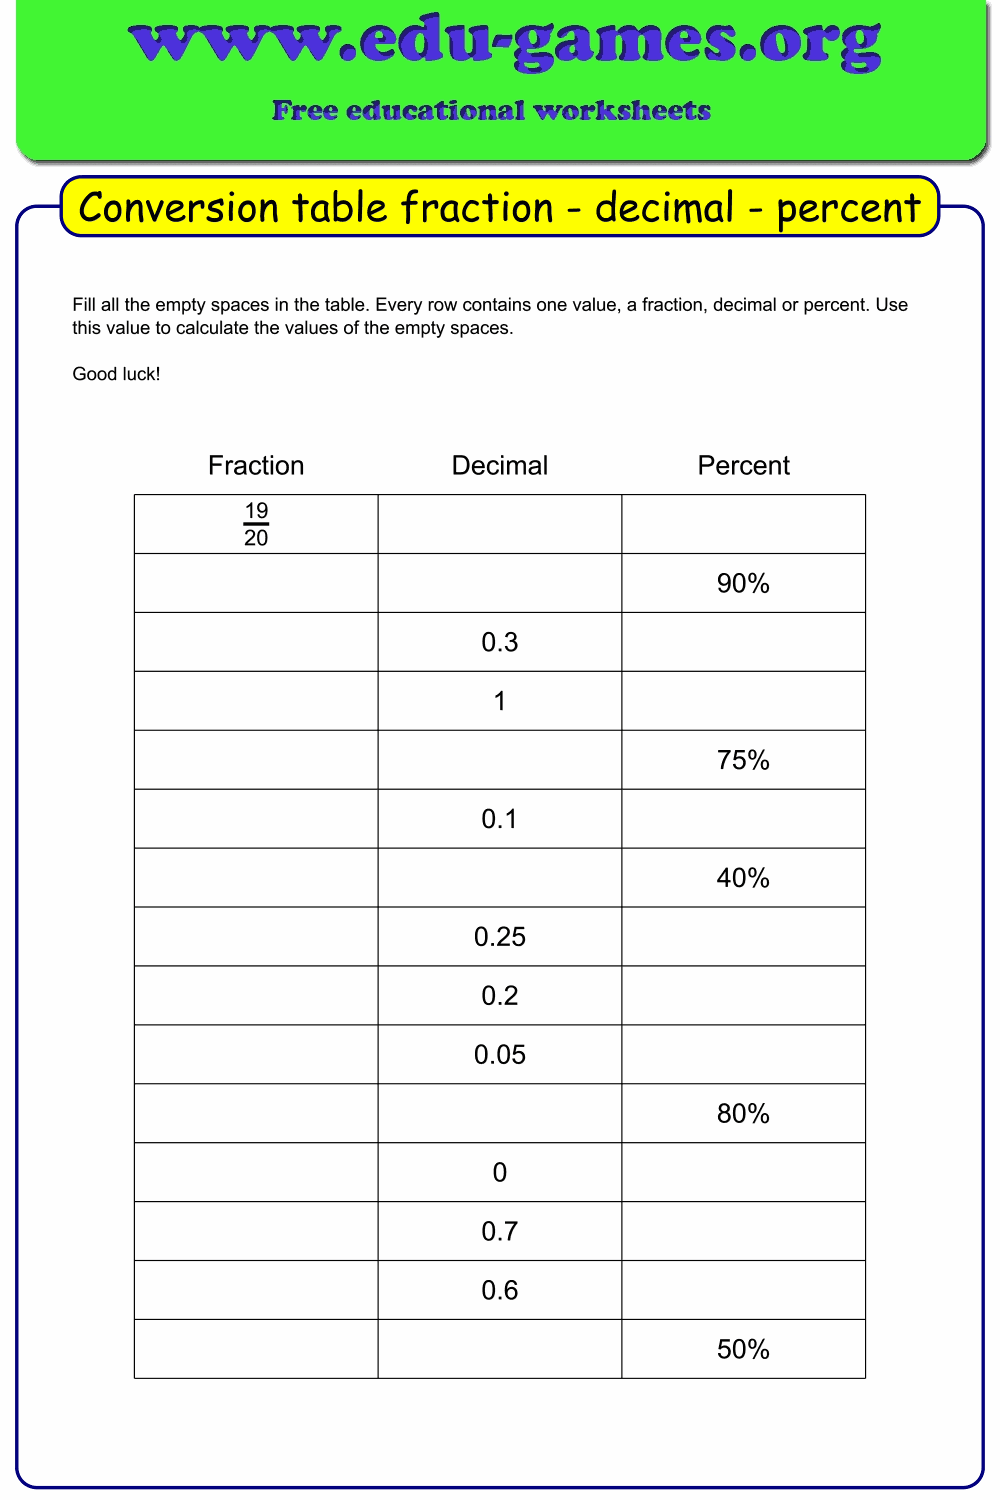 Common Conversion Table between fraction, decimal and percent. For Fraction Decimal Percent Conversion Worksheet